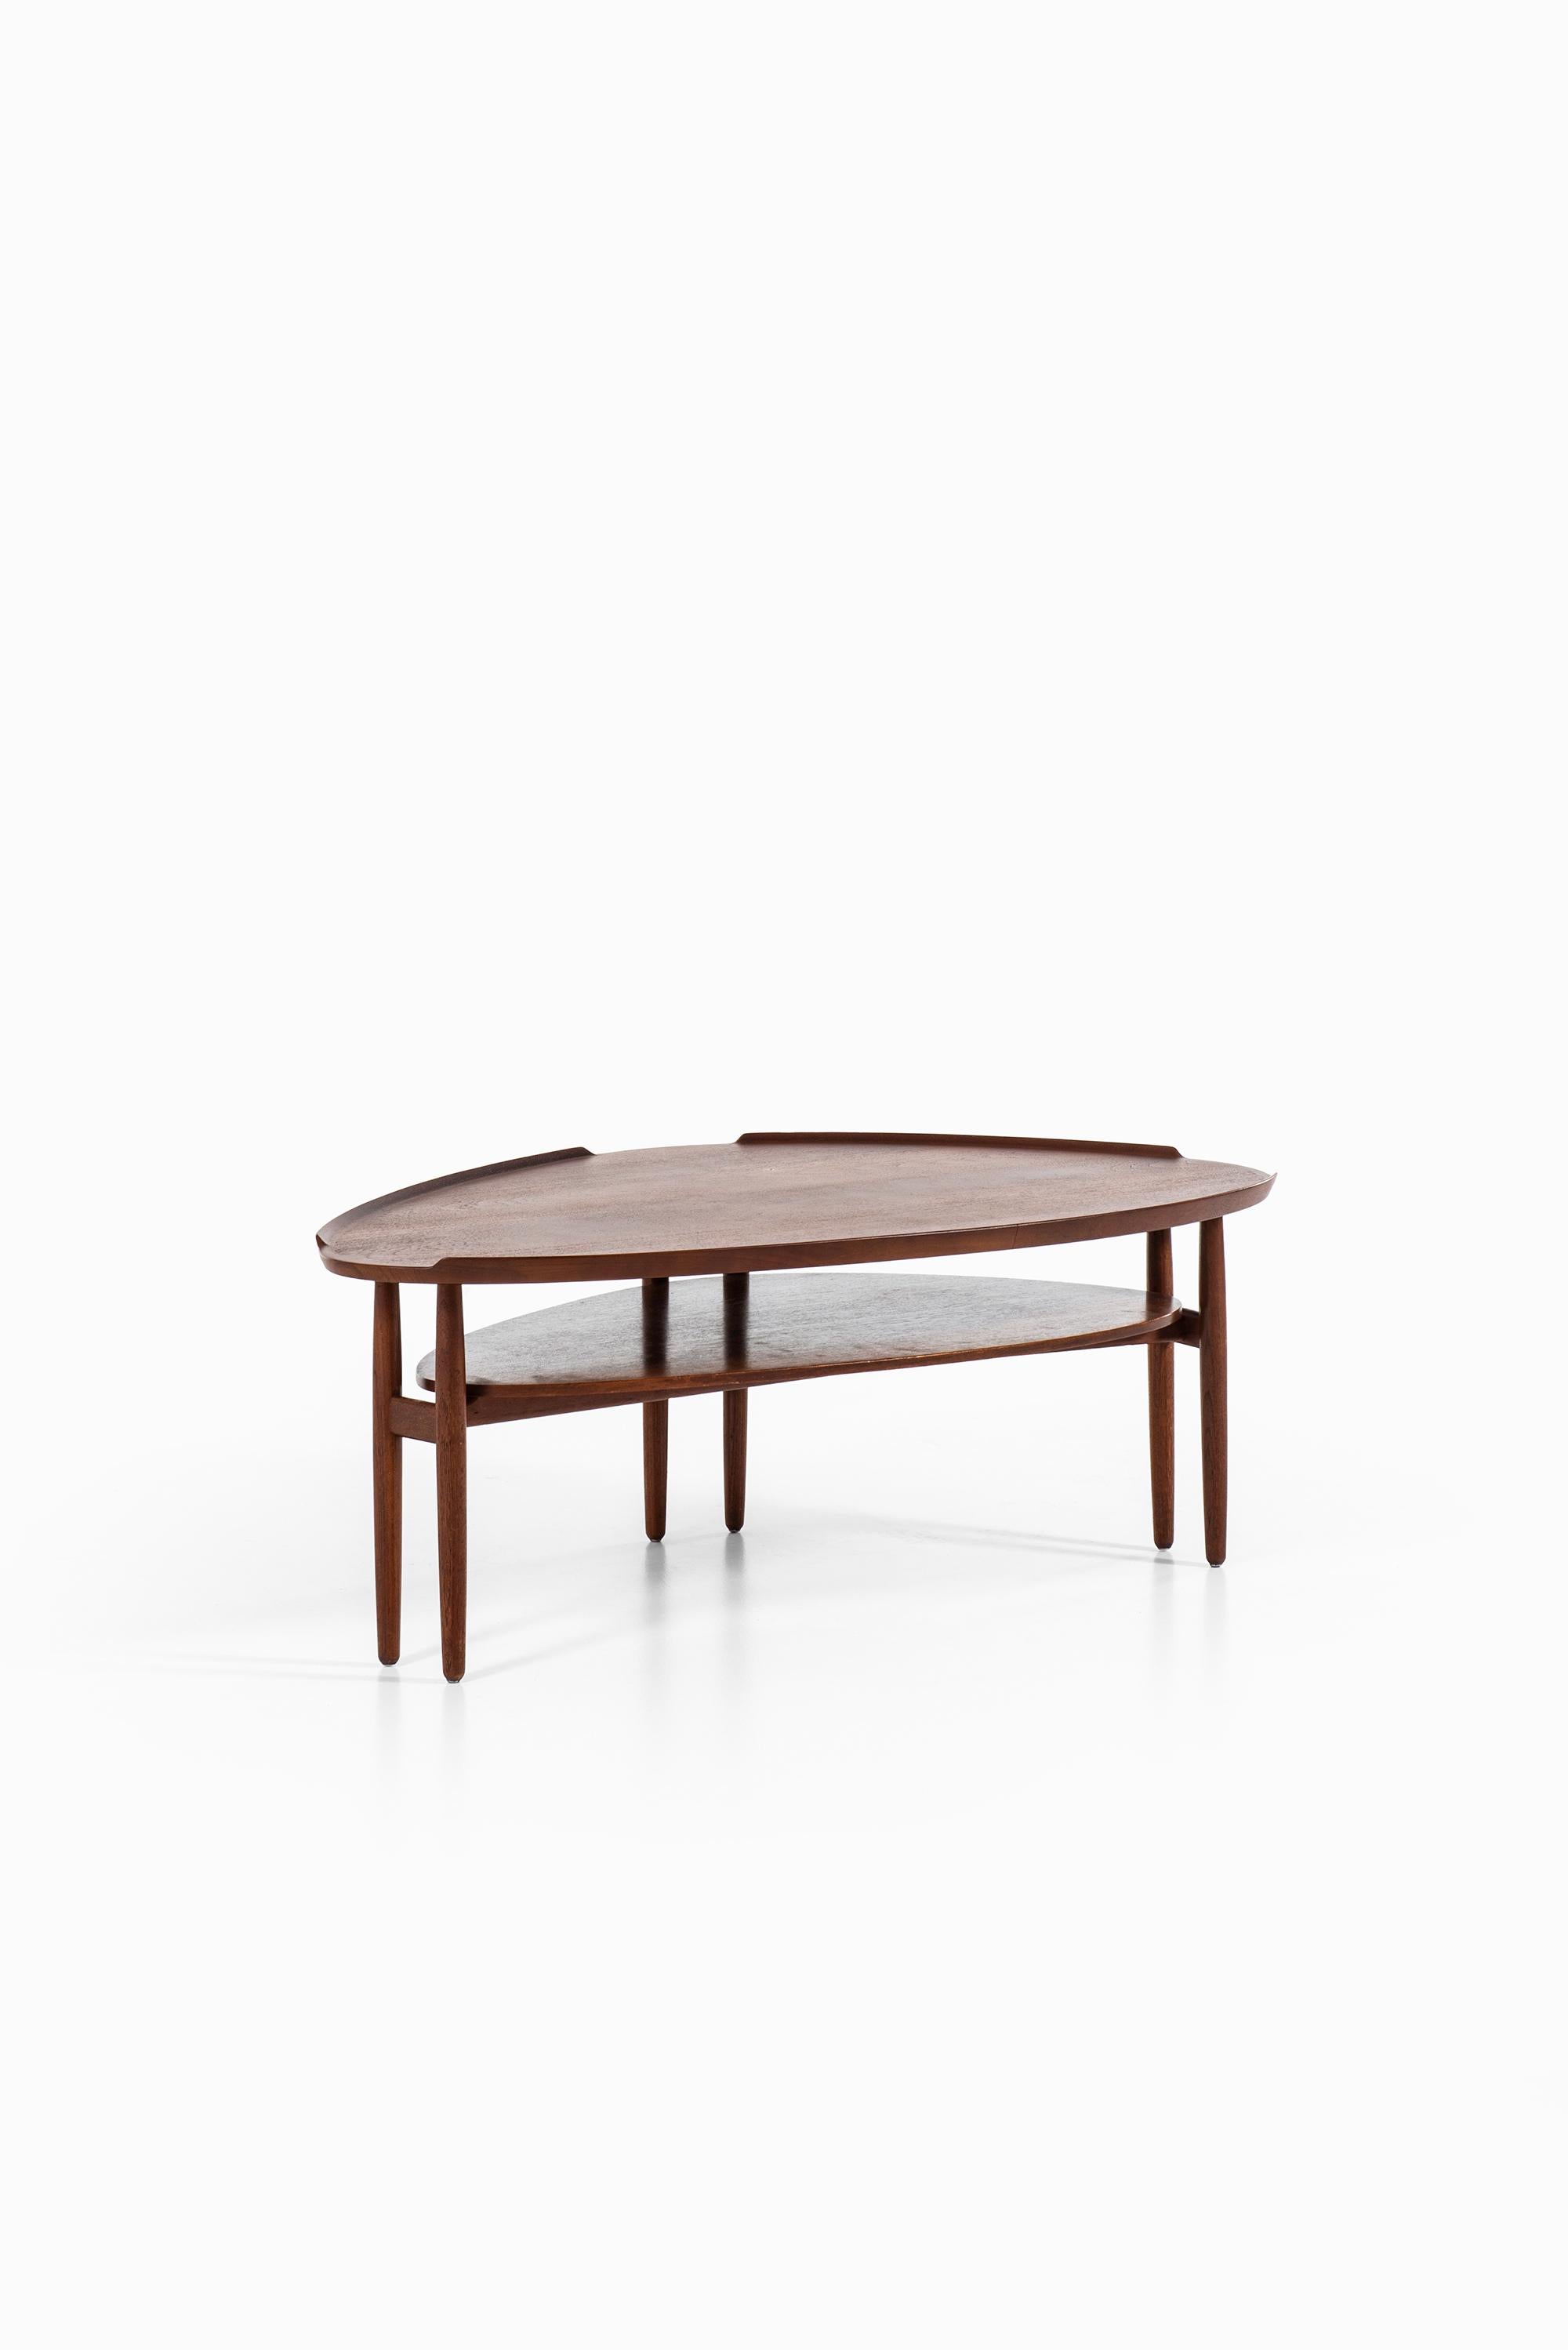 Mid-20th Century Arne Vodder Coffee Table in Teak Produced in Denmark For Sale